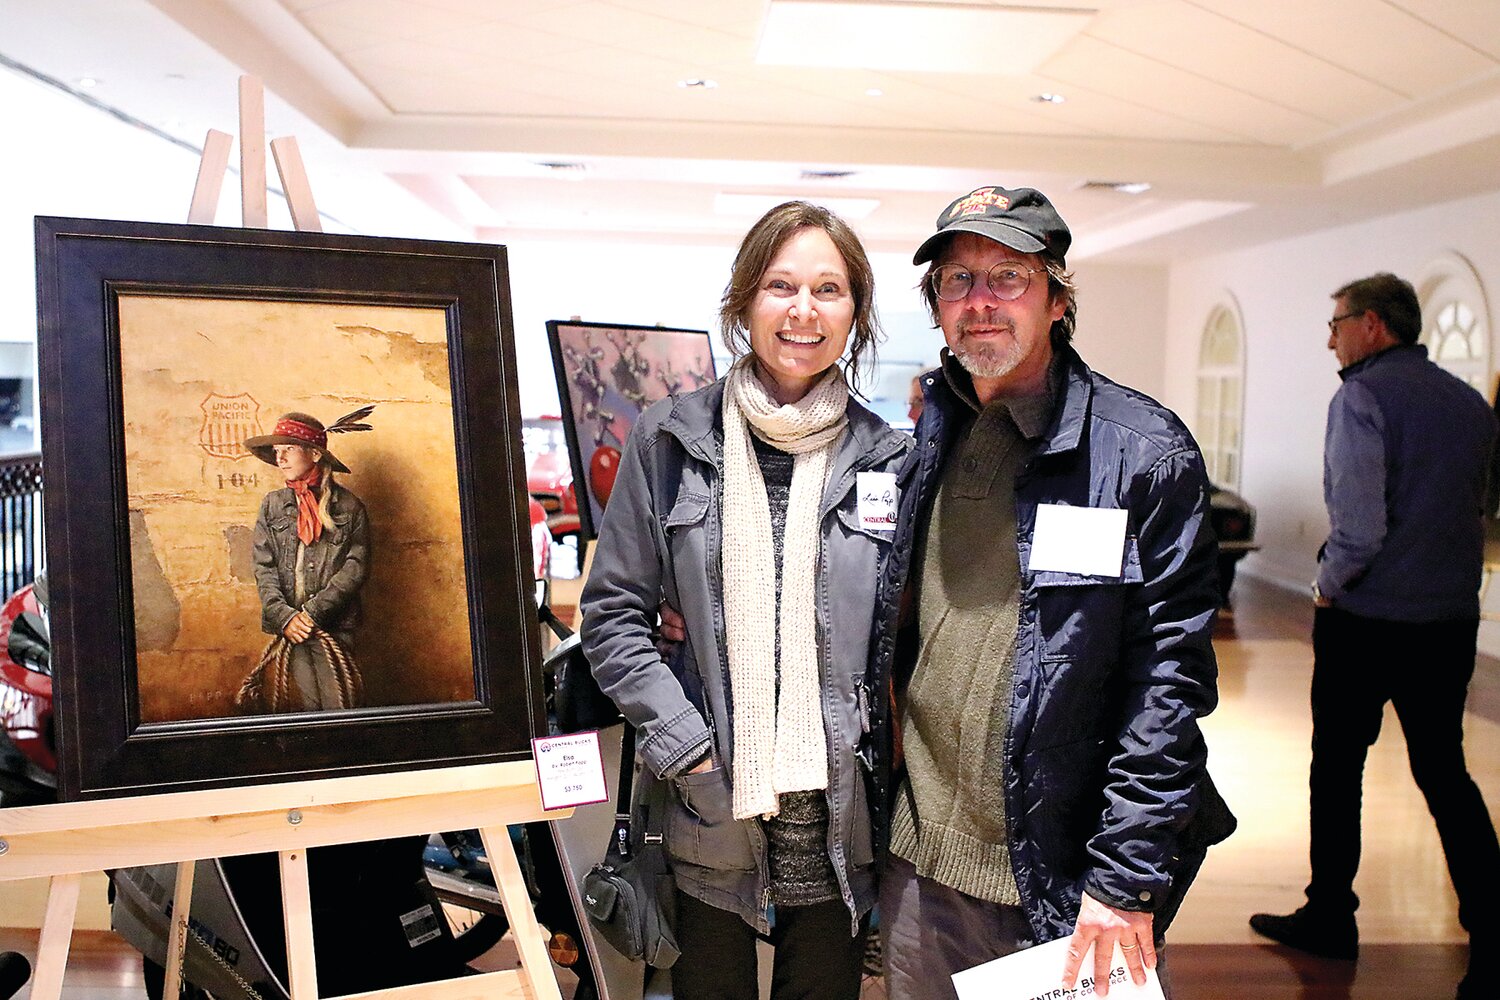 Artist Robert Papp, right, with his wife, Lisa, and his painting, “Elsa,” at a prior event.